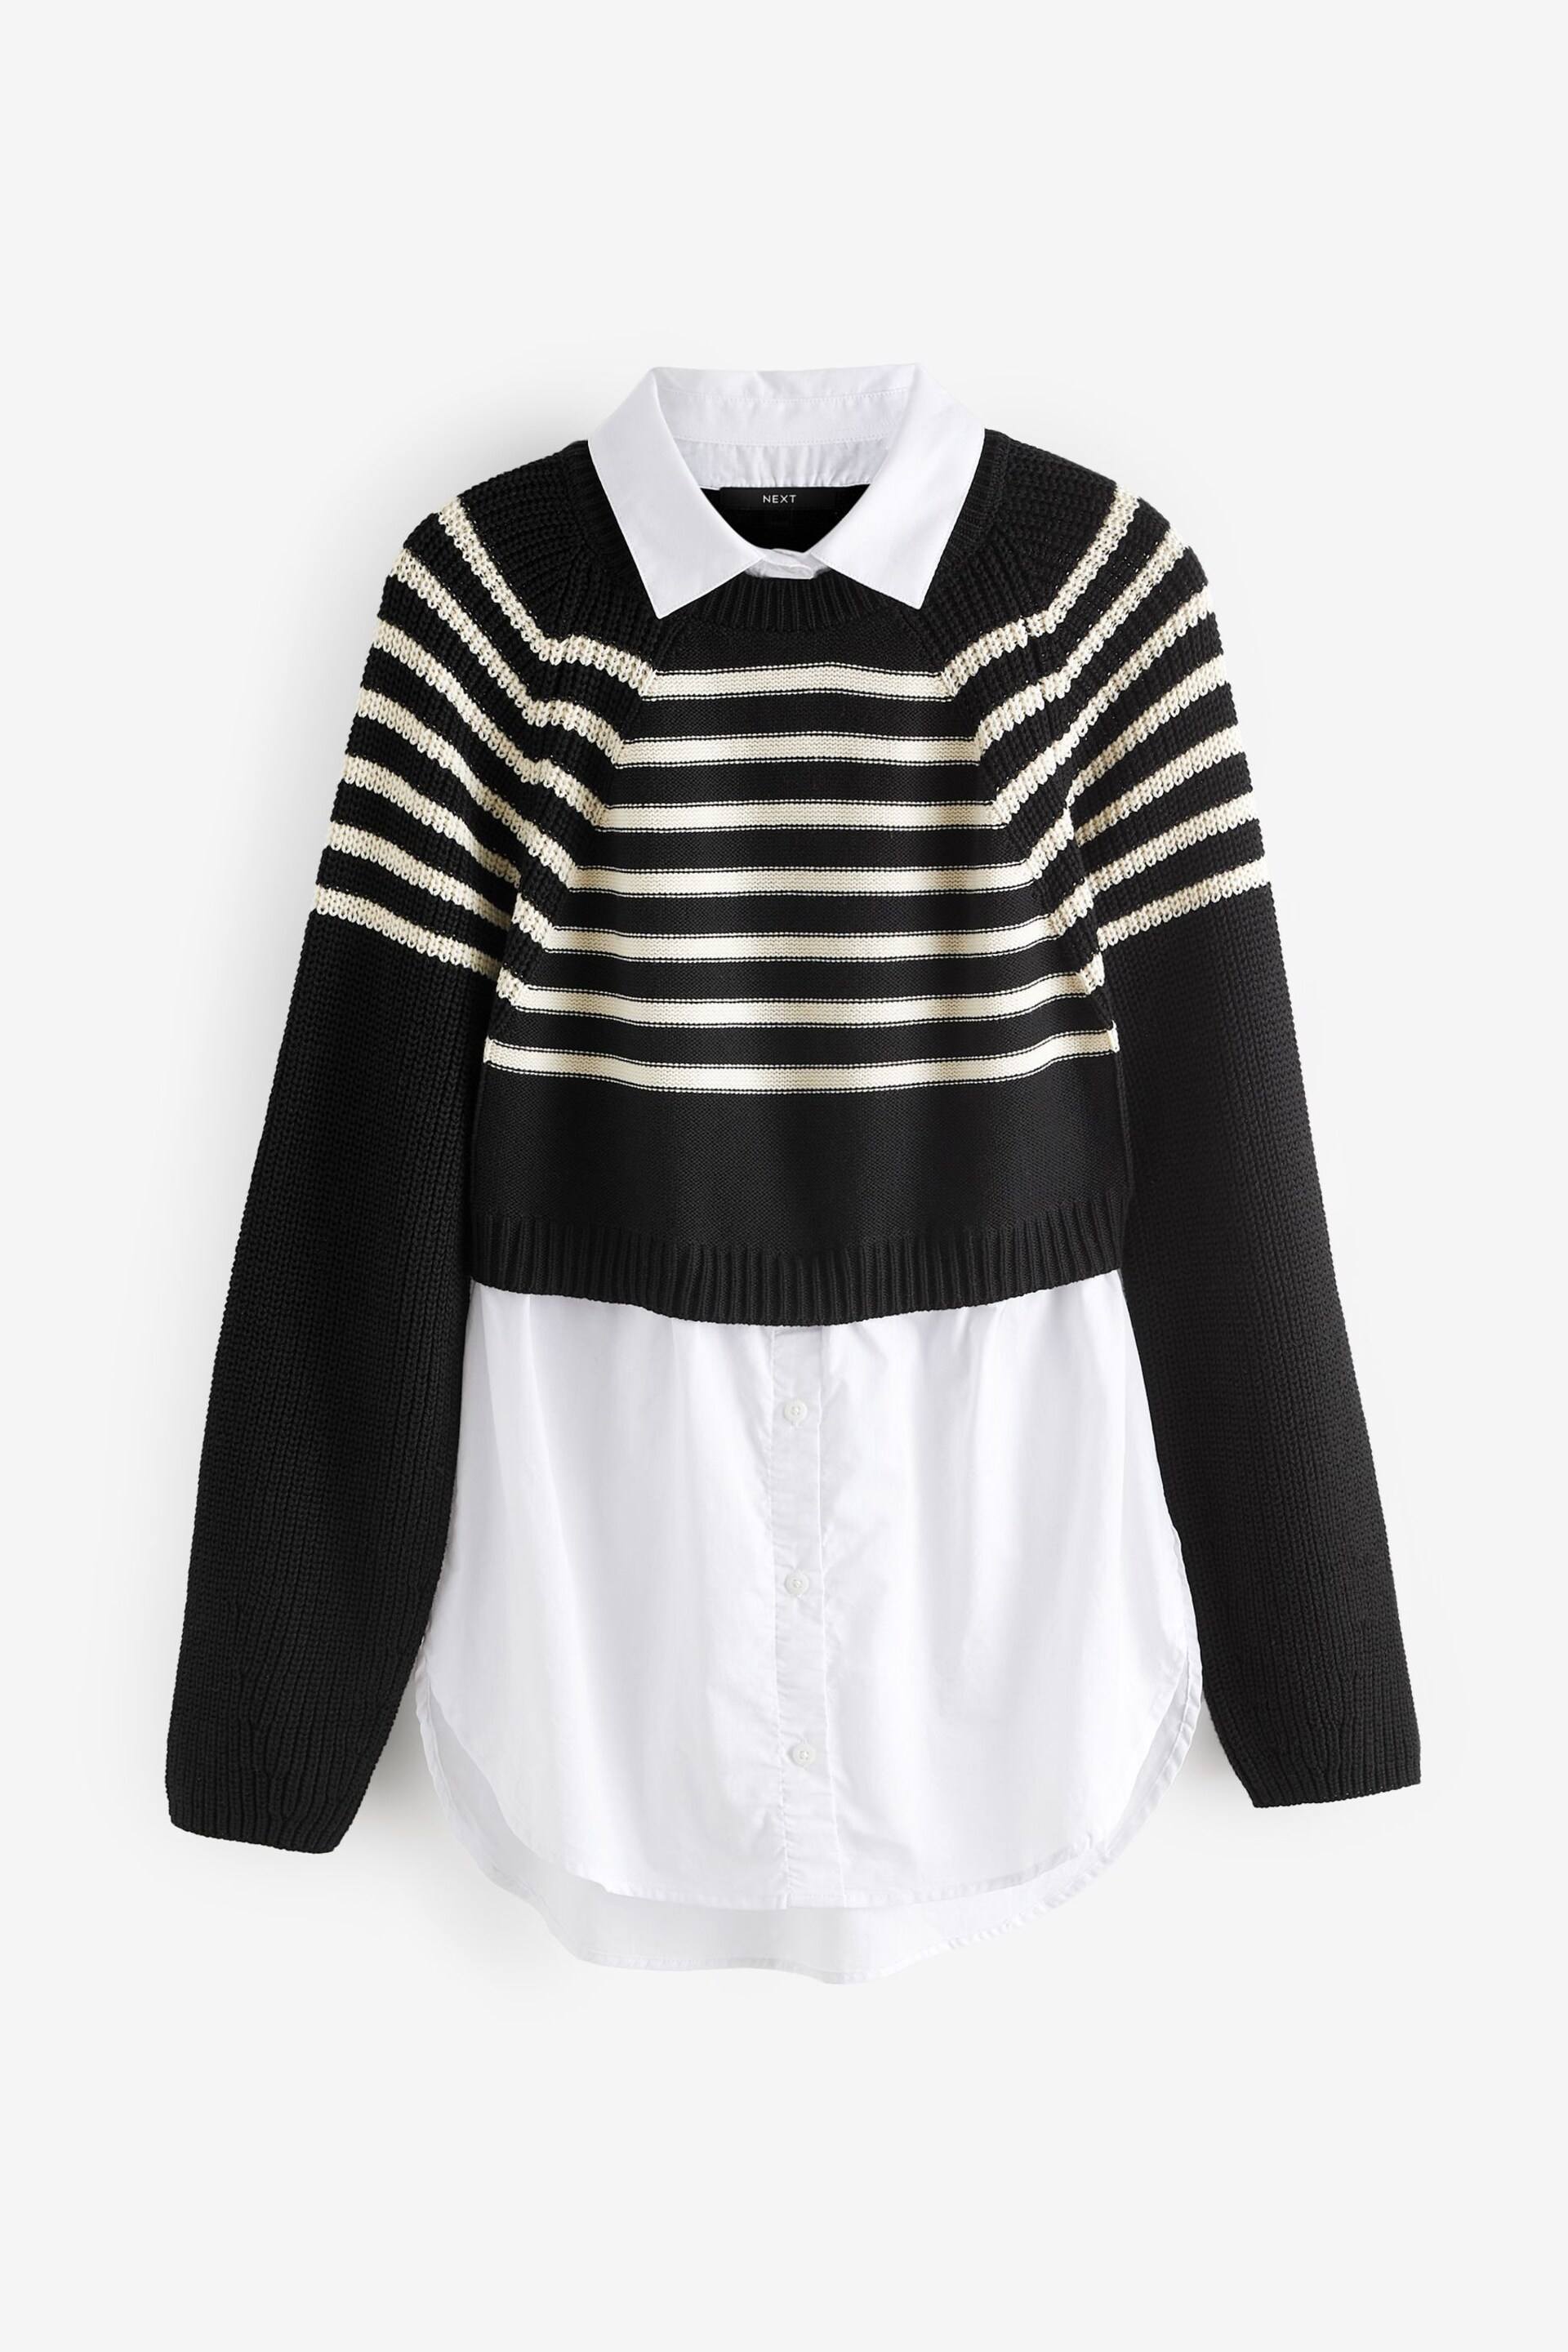 Black and White Stripe Cropped Jumper Layer Shirt - Image 5 of 6